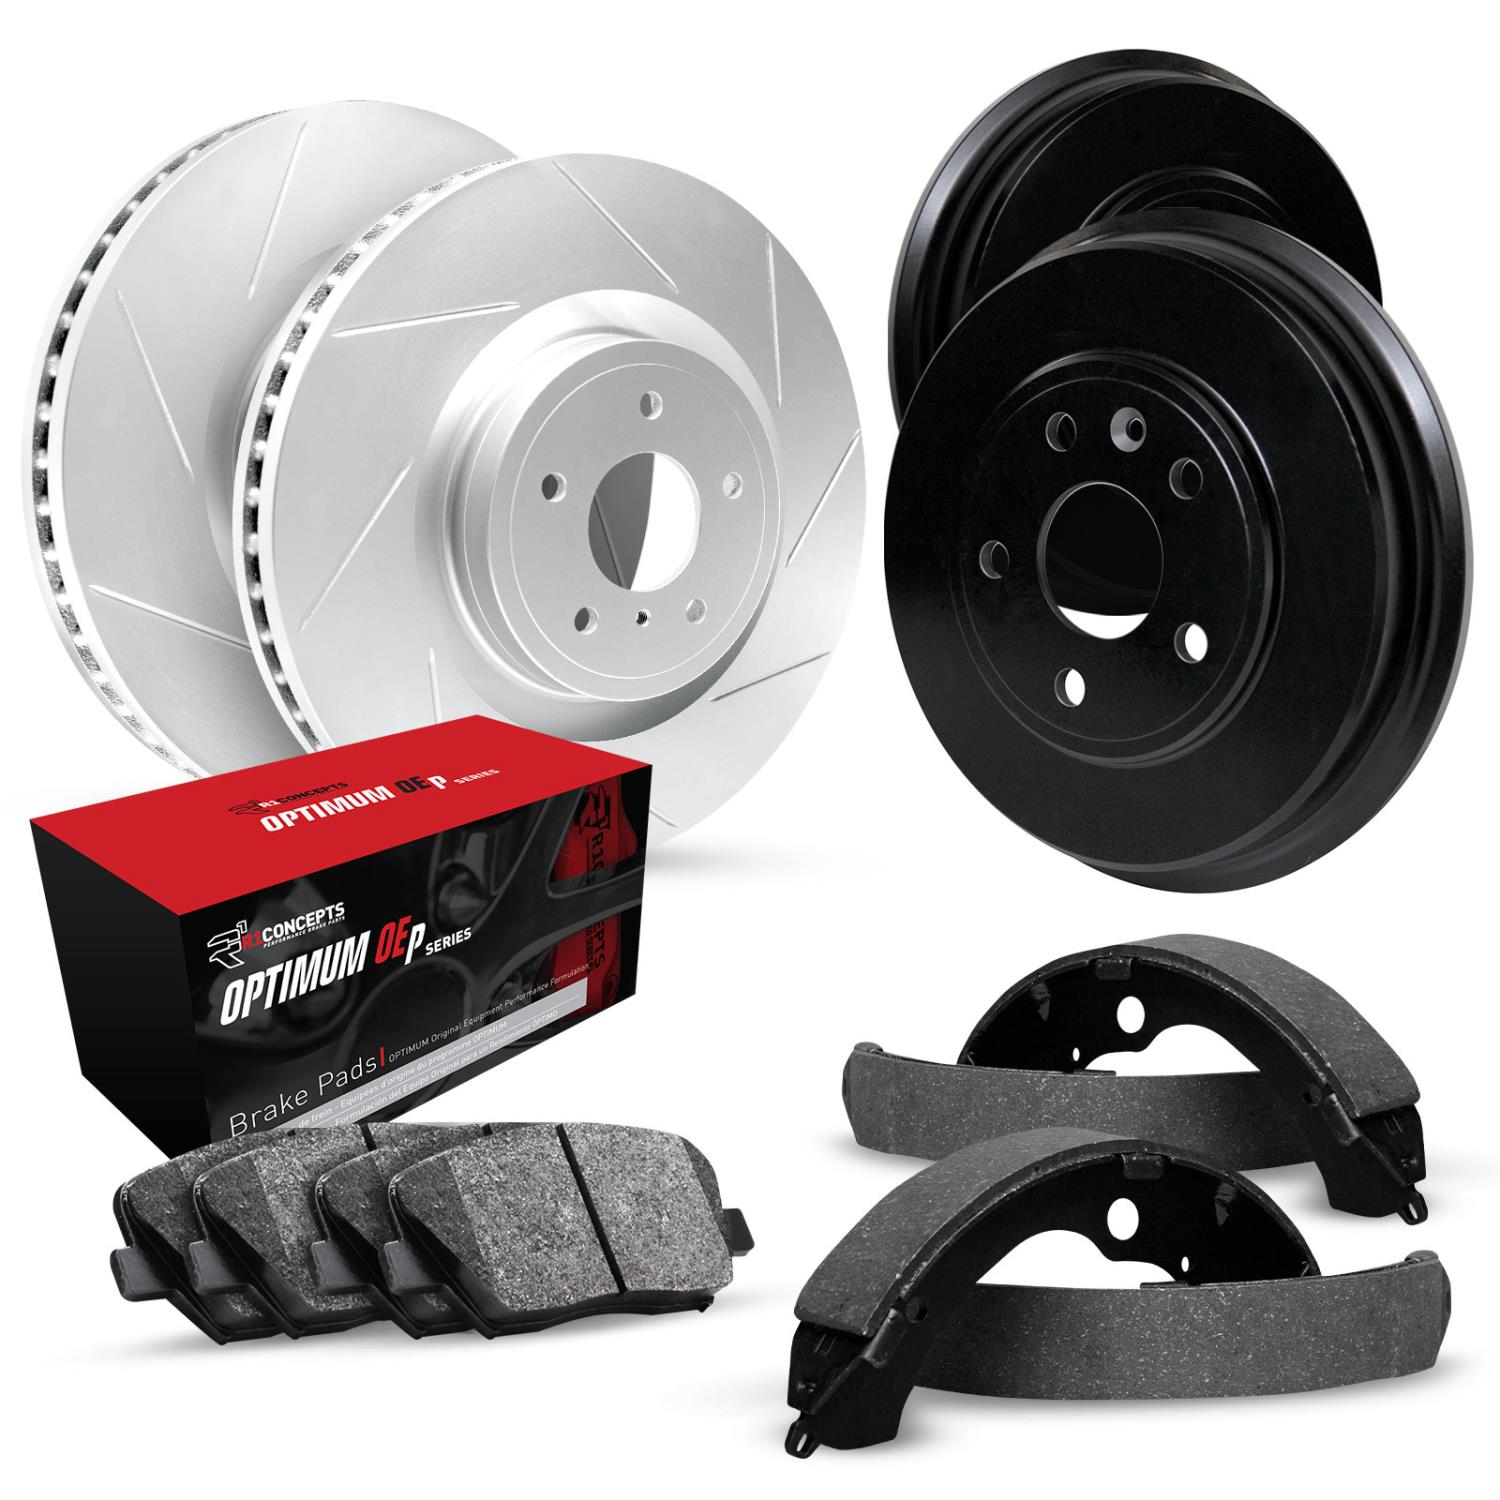 GEO-Carbon Slotted Brake Rotor & Drum Set w/Optimum OE Pads & Shoes, 1971-1973 Ford/Lincoln/Mercury/Mazda